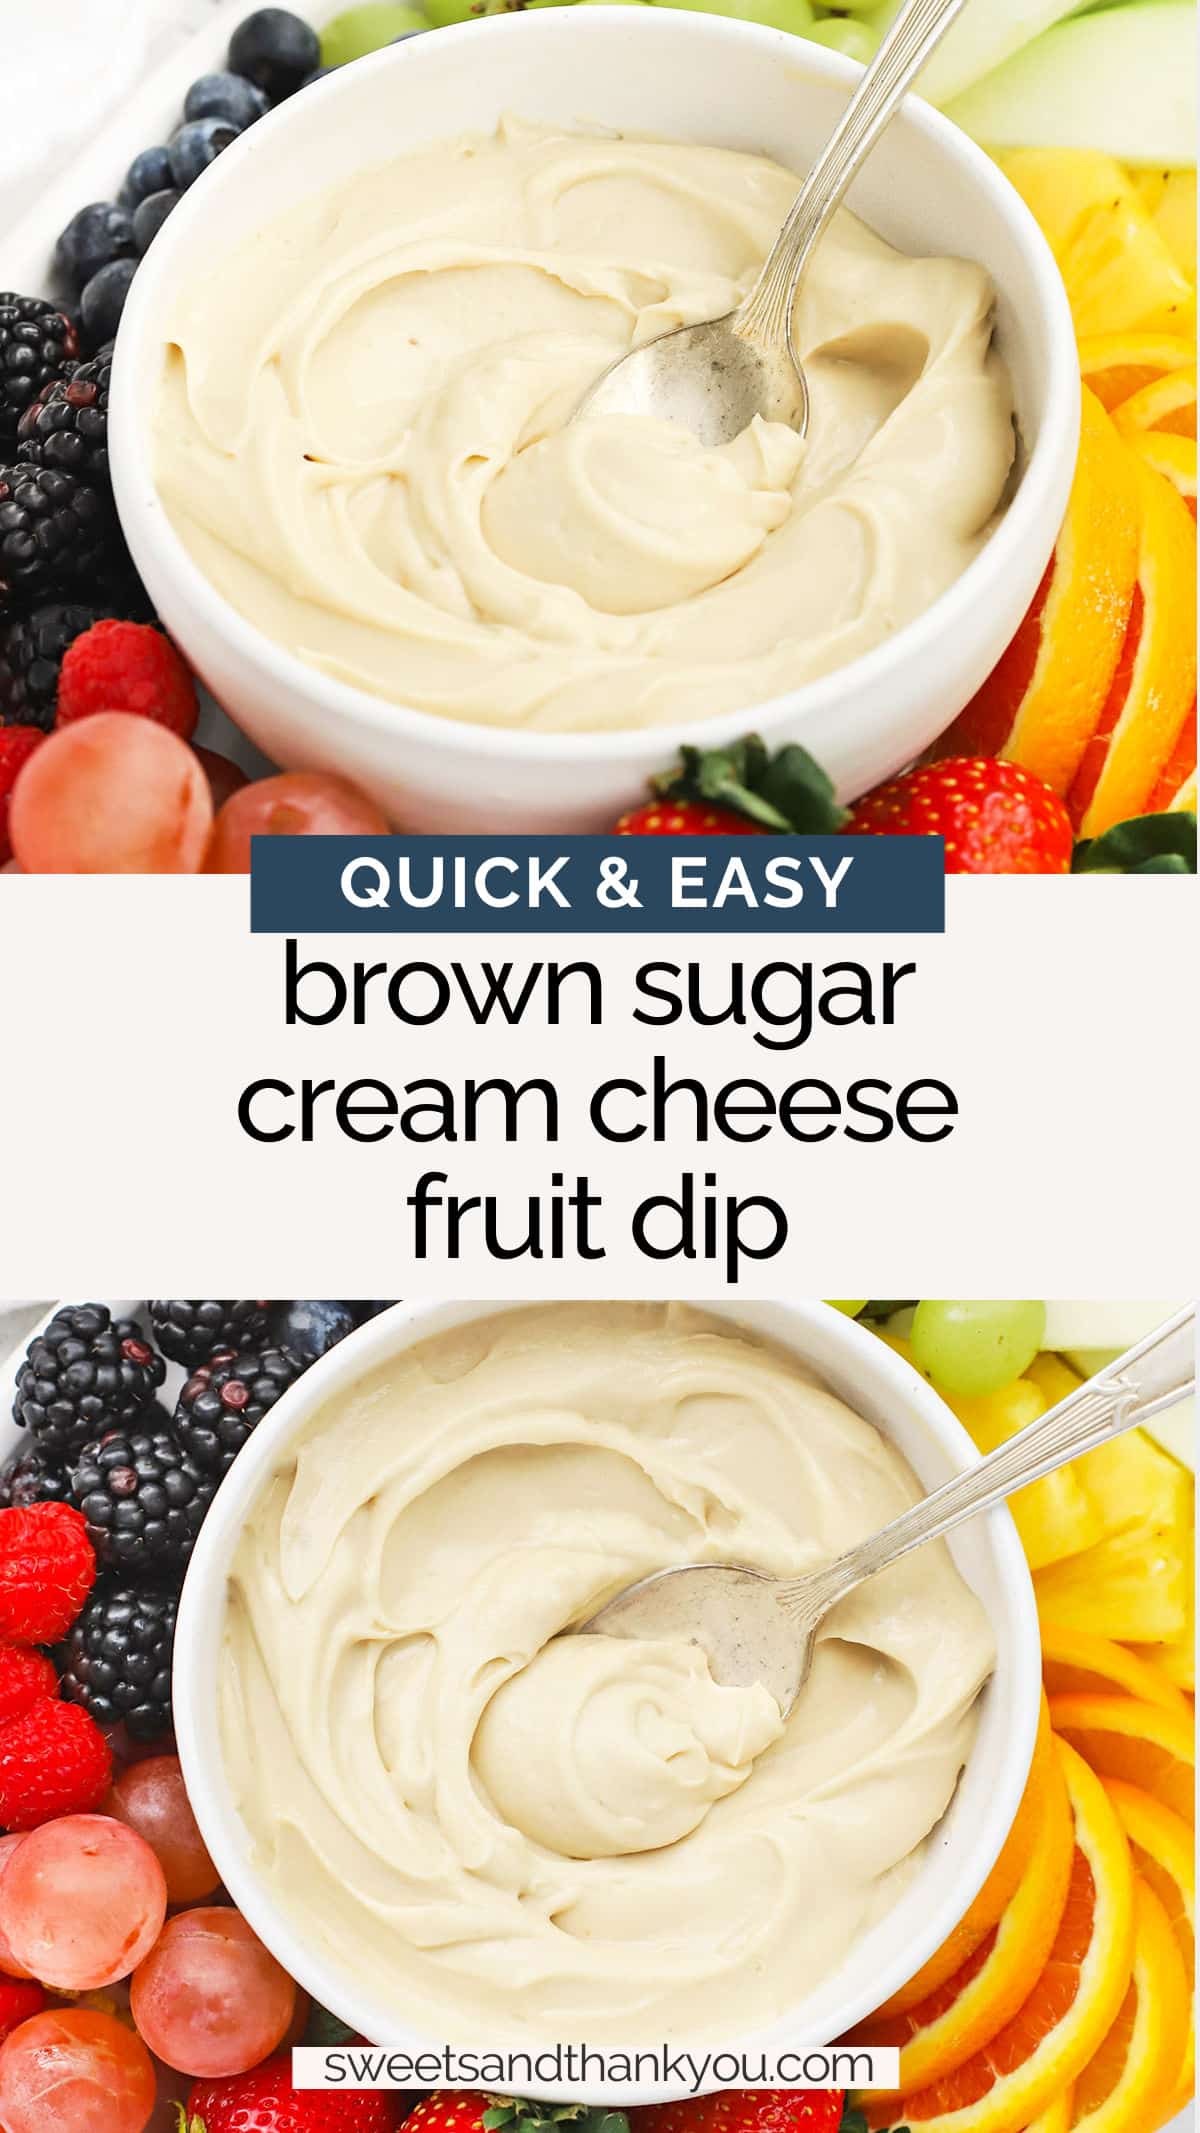 Brown Sugar Cream Cheese Fruit Dip - This easy brown sugar fruit dip recipe only takes 5 ingredients and less than 5 minutes to make. It makes every occasion a little more delicious! // Cream Cheese Fruit Dip Recipe // brown sugar dip // caramel cream cheese fruit dip // party fruit dip // fruit tray // gluten free fruit dip // fruit dip without yogurt // fruit dip without sour cream // caramel brown sugar fruit dip // Sweets & Thank You recipes